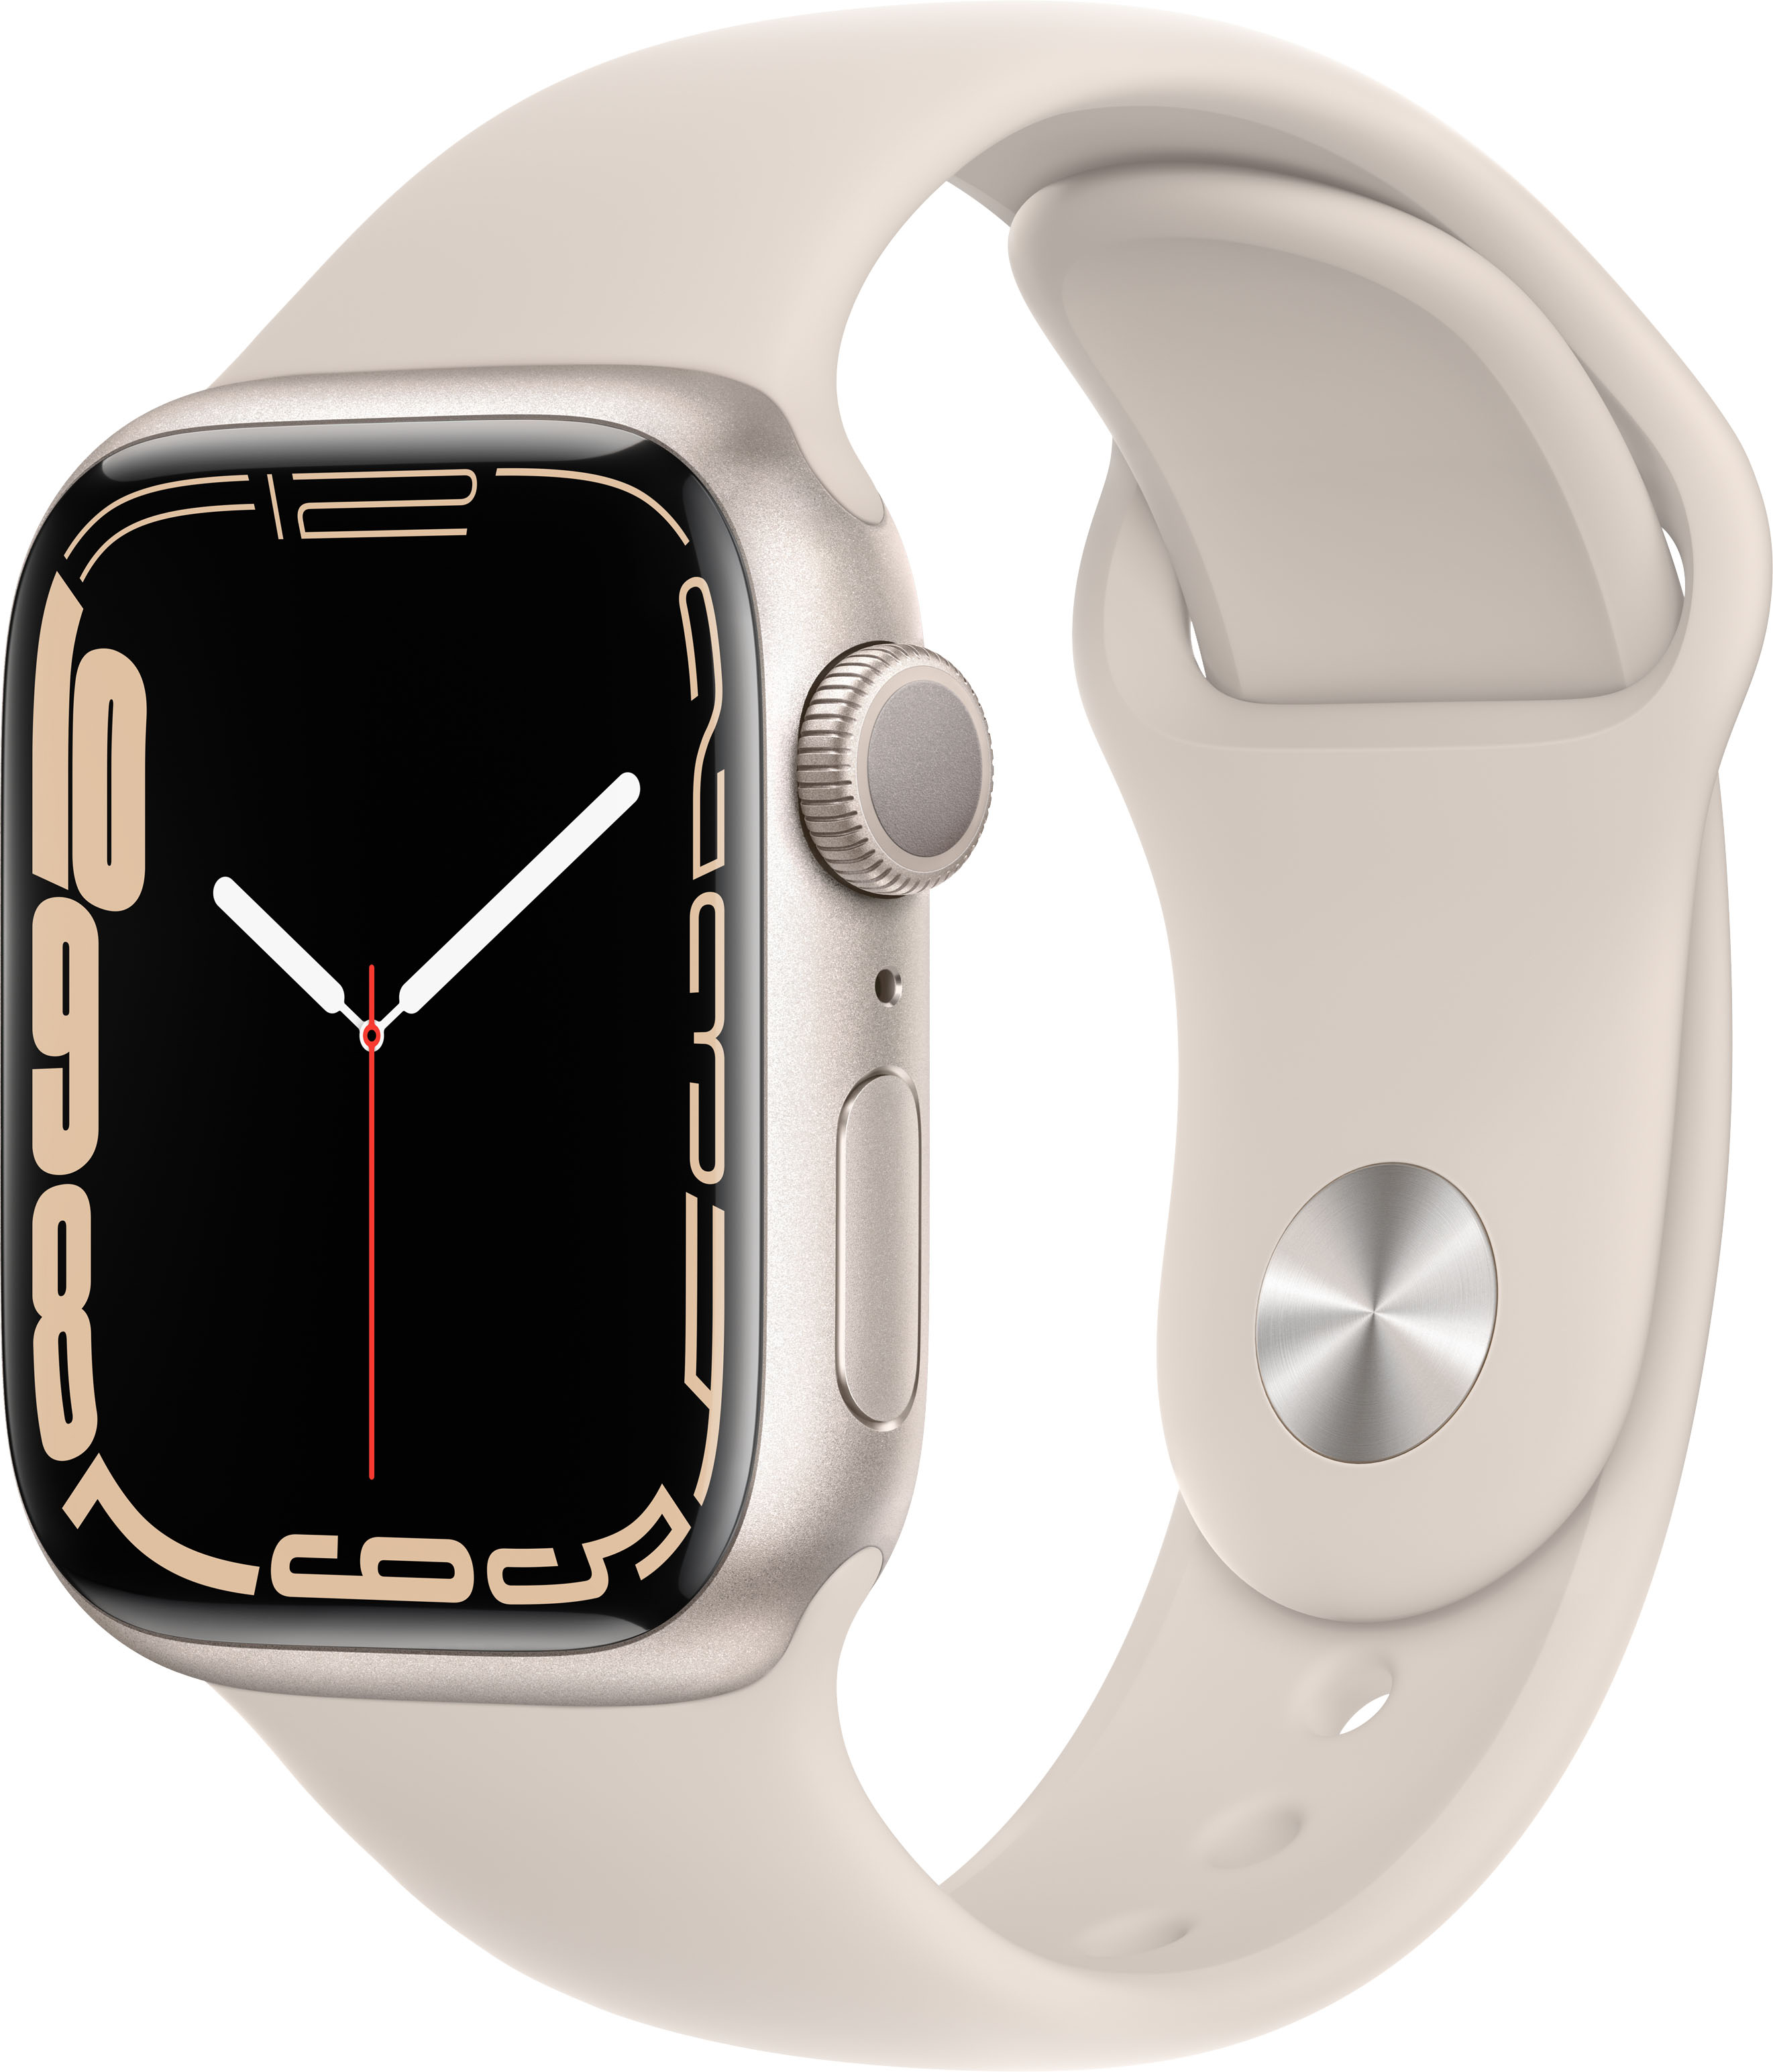 Apple Watch Series 7 (GPS) 41mm WAS $399.00 NOW $329.00 SAVE $70